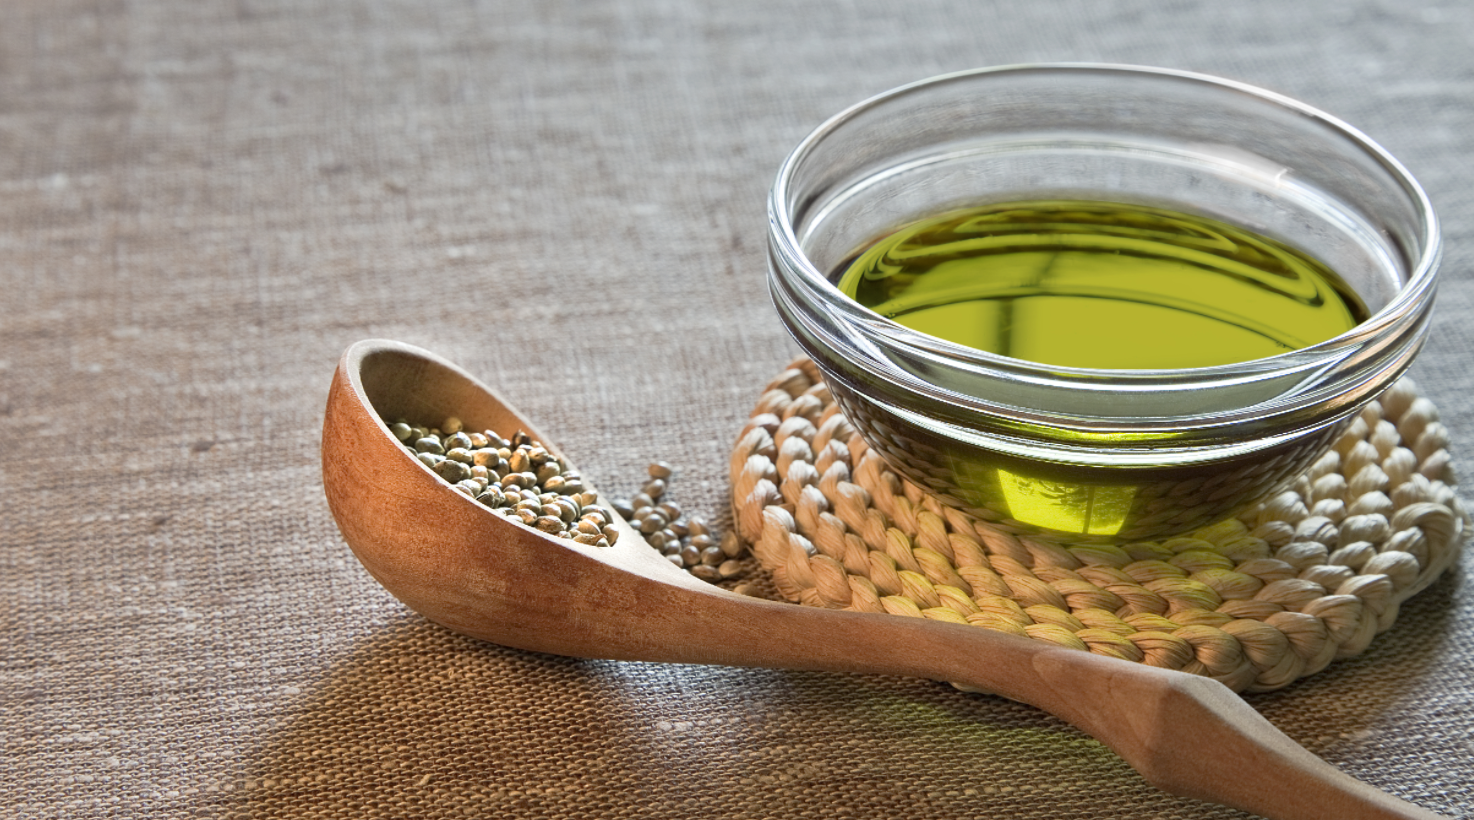 How is Hemp Seed Oil Going to Benefit You